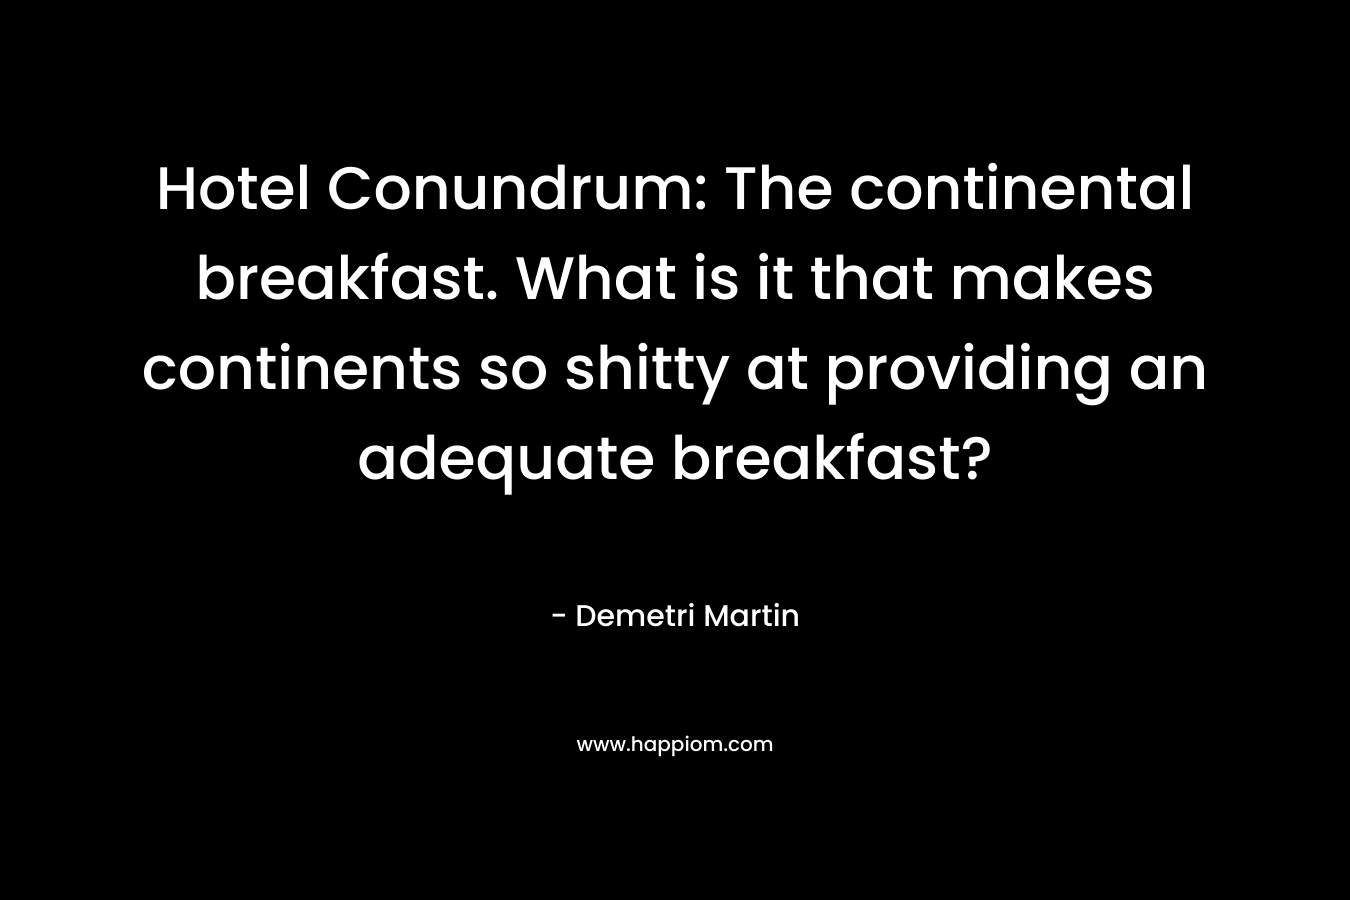 Hotel Conundrum: The continental breakfast. What is it that makes continents so shitty at providing an adequate breakfast?